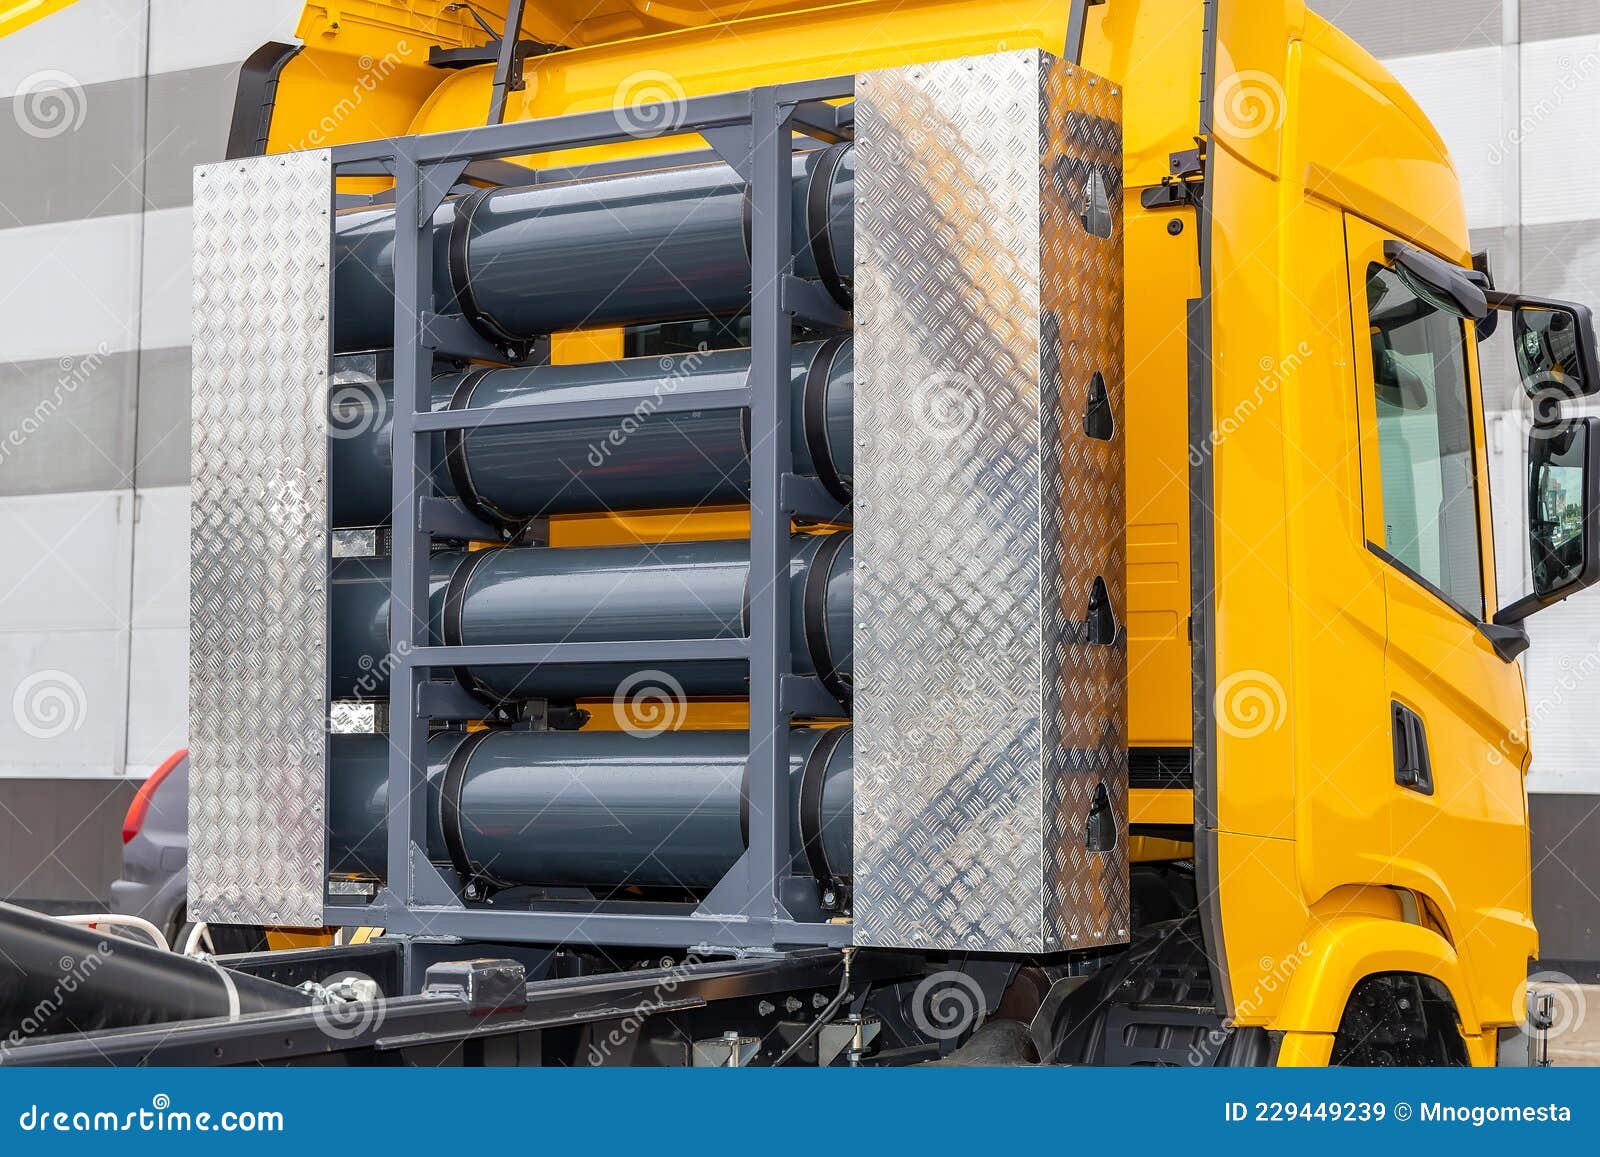 Compressed Natural Gas Cylinders Behind The Truck Cab. Truck With A ...